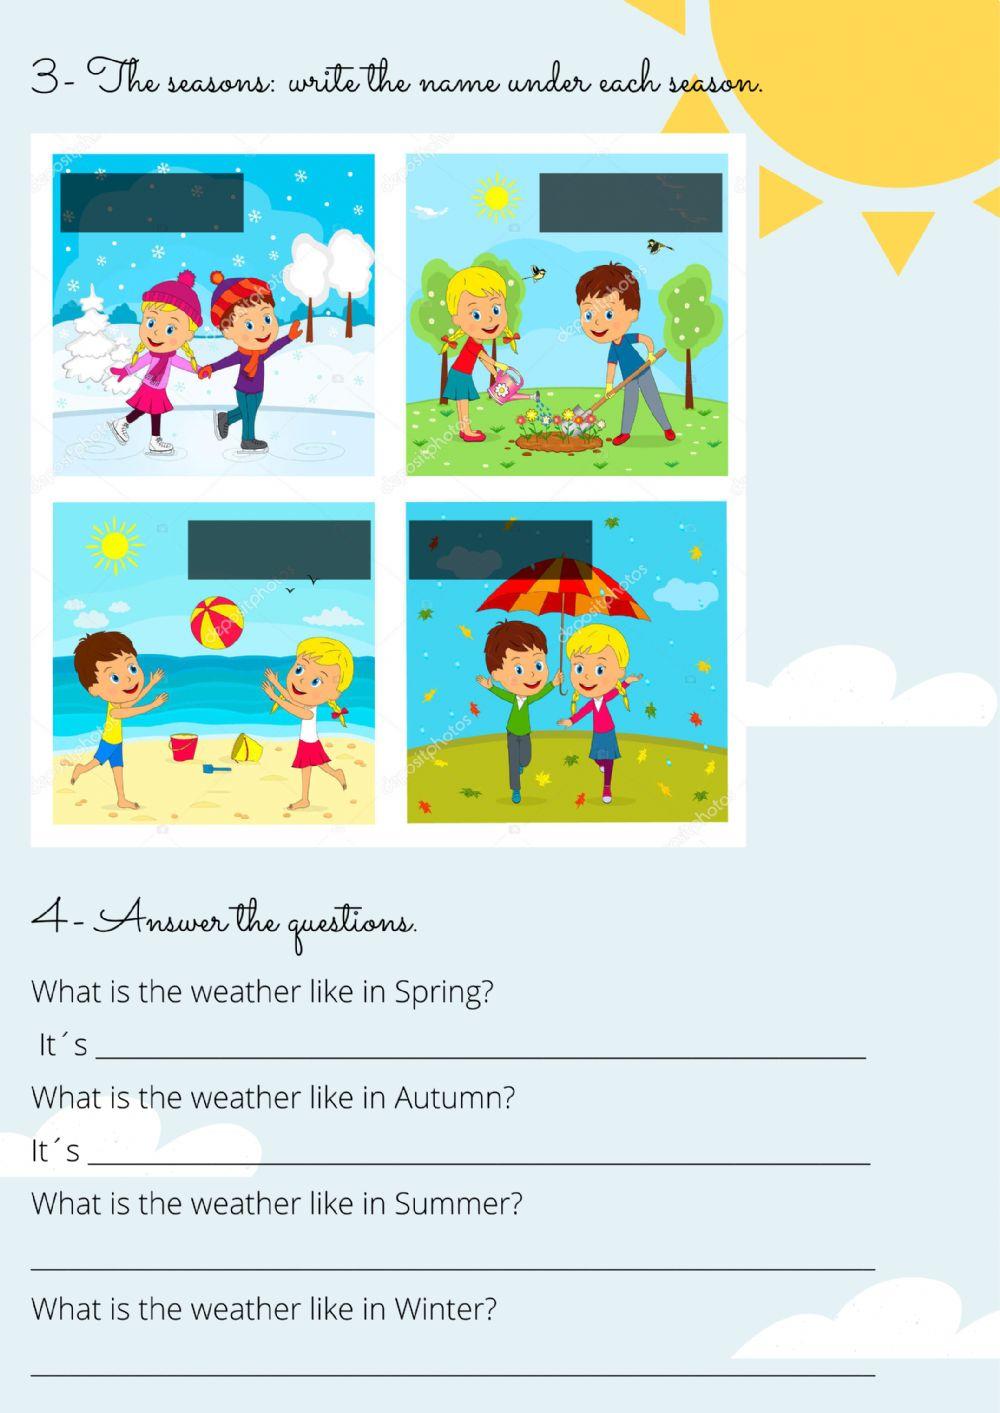 The weather and the seasons